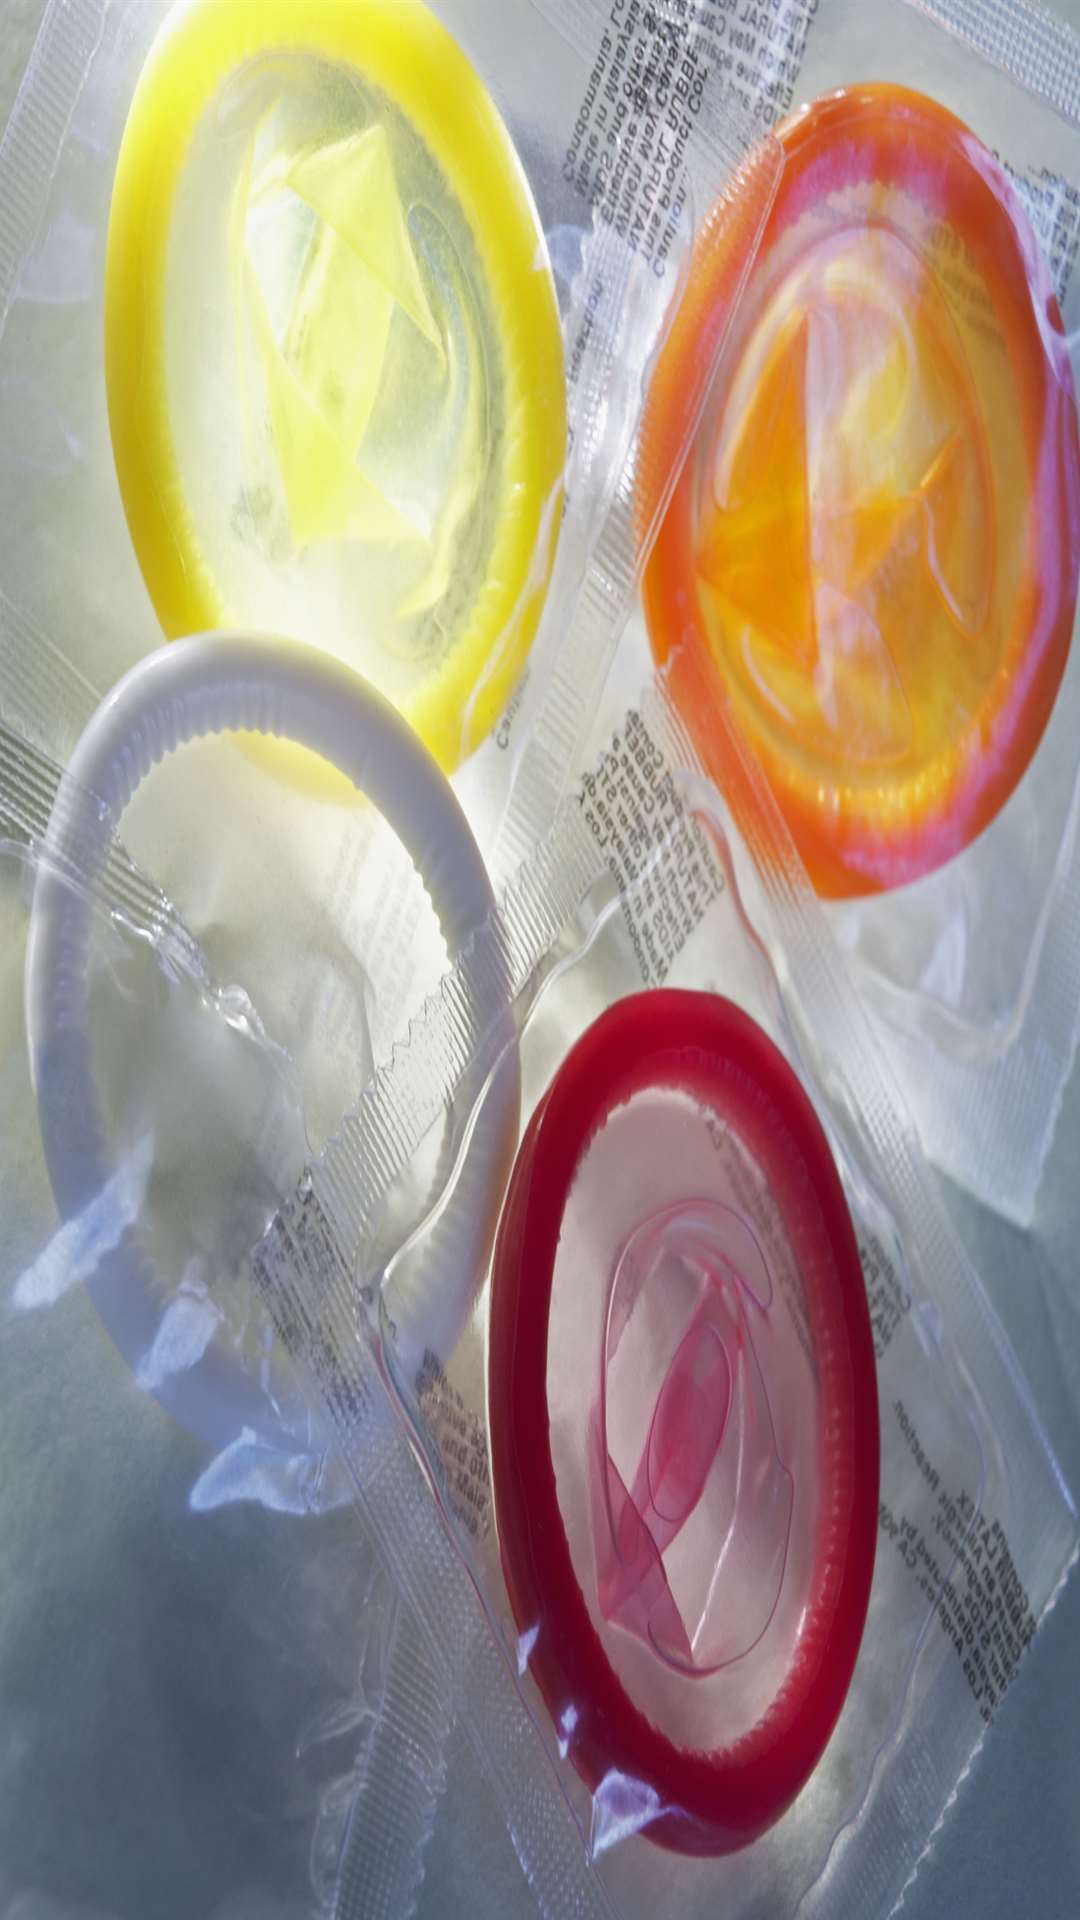 Condoms come in lots of varieties but our columnist says they are too dear and inaccessible